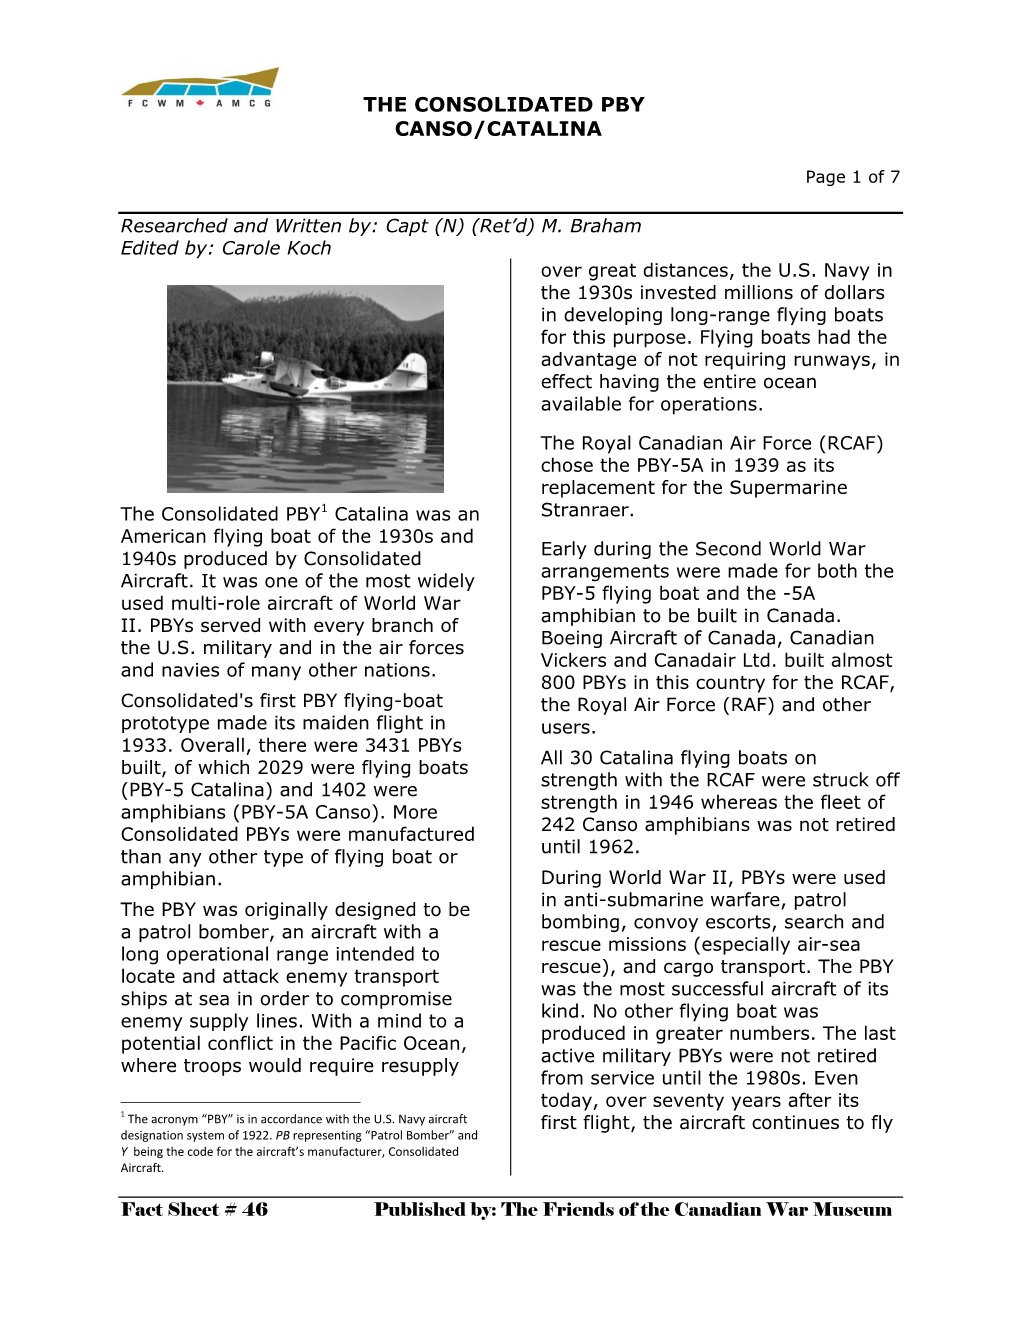 Fact Sheet # 46 Published By: the Friends of the Canadian War Museum